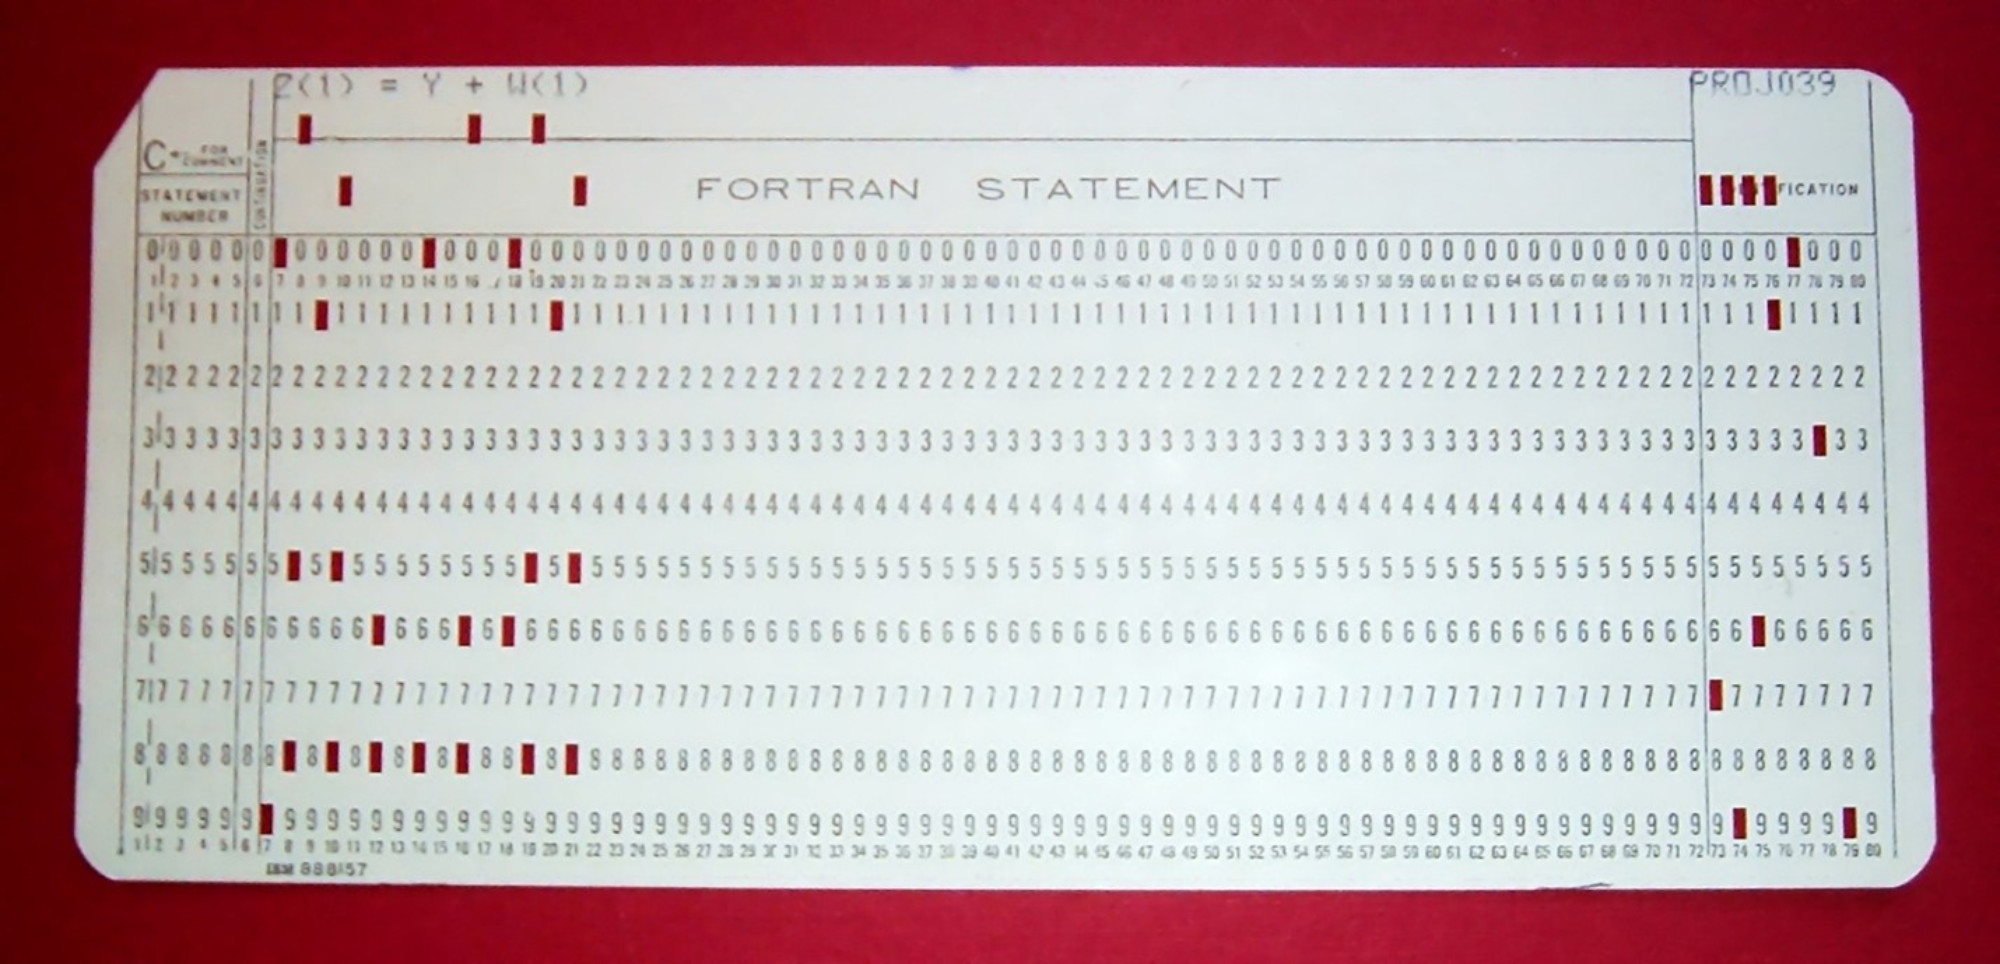 Photo of a punch card from an old computing system